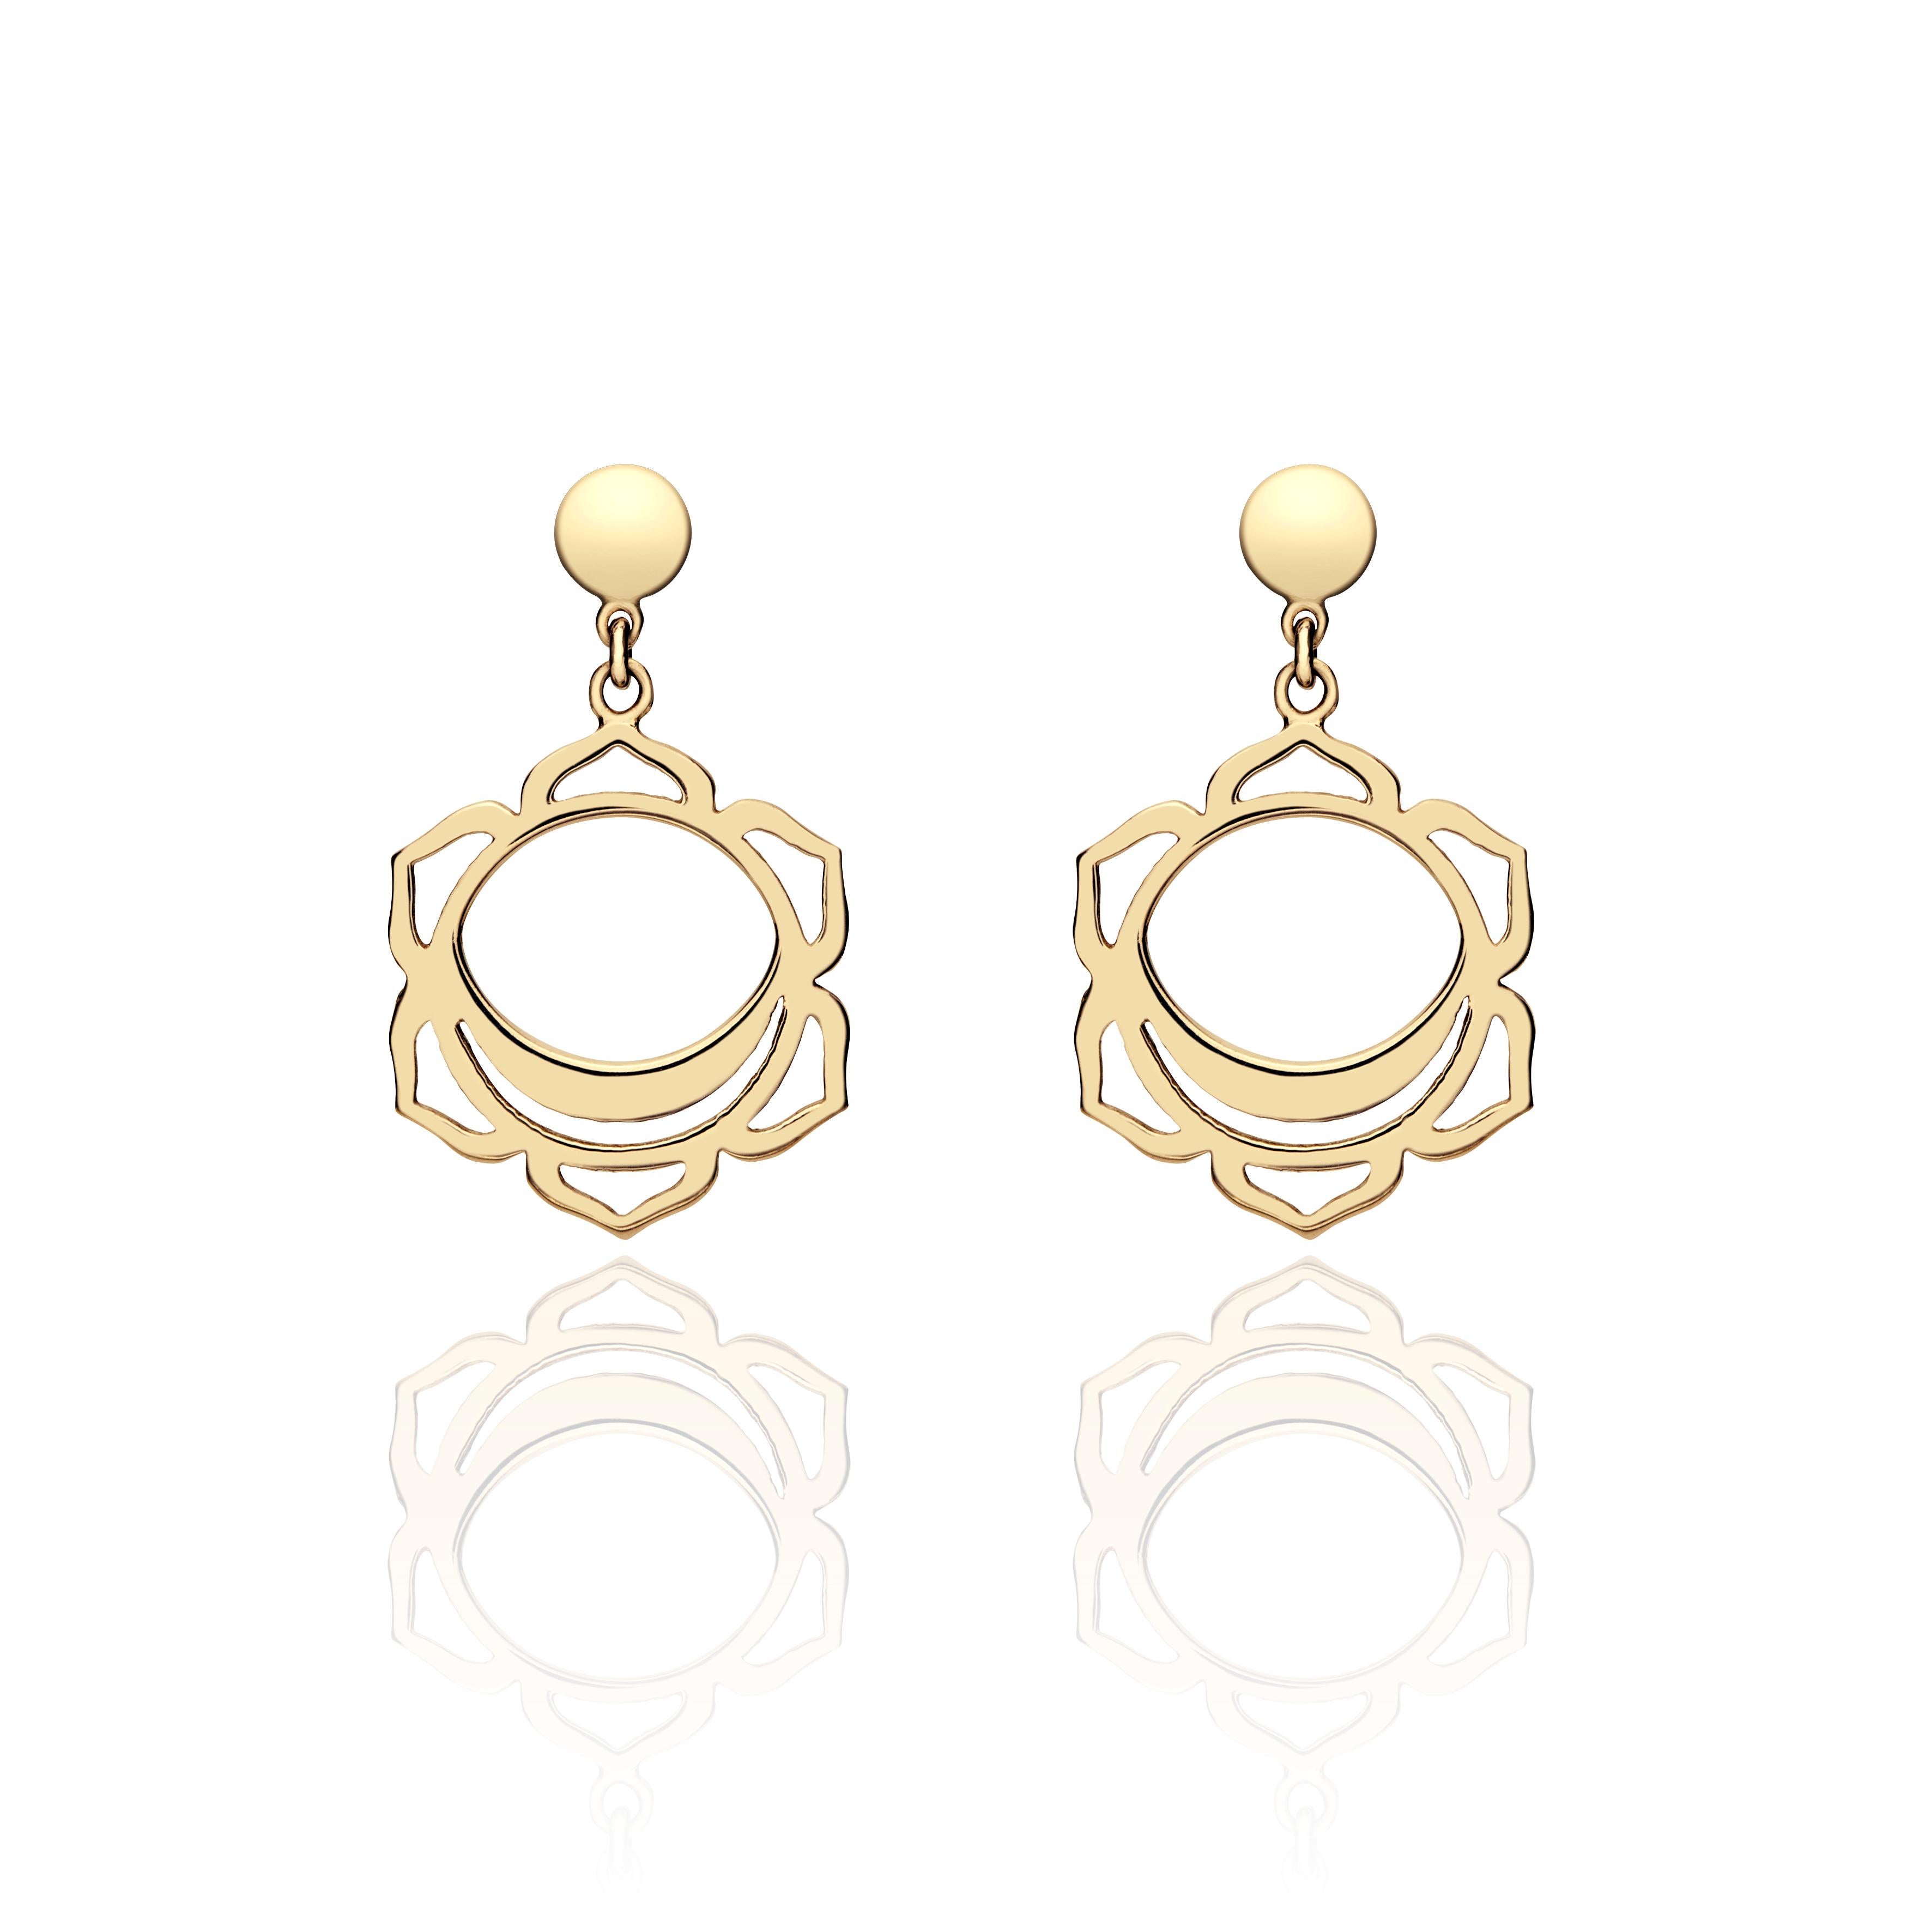 Unique drop pair of earrings with Svadhistana-The Sex Chakra handcrafted in 14Kt Gold.
The Svadhisthana Chakra is the mental center of our body, that is located under the belly button. It is strongly connected with joy, creativity, lusciousness and